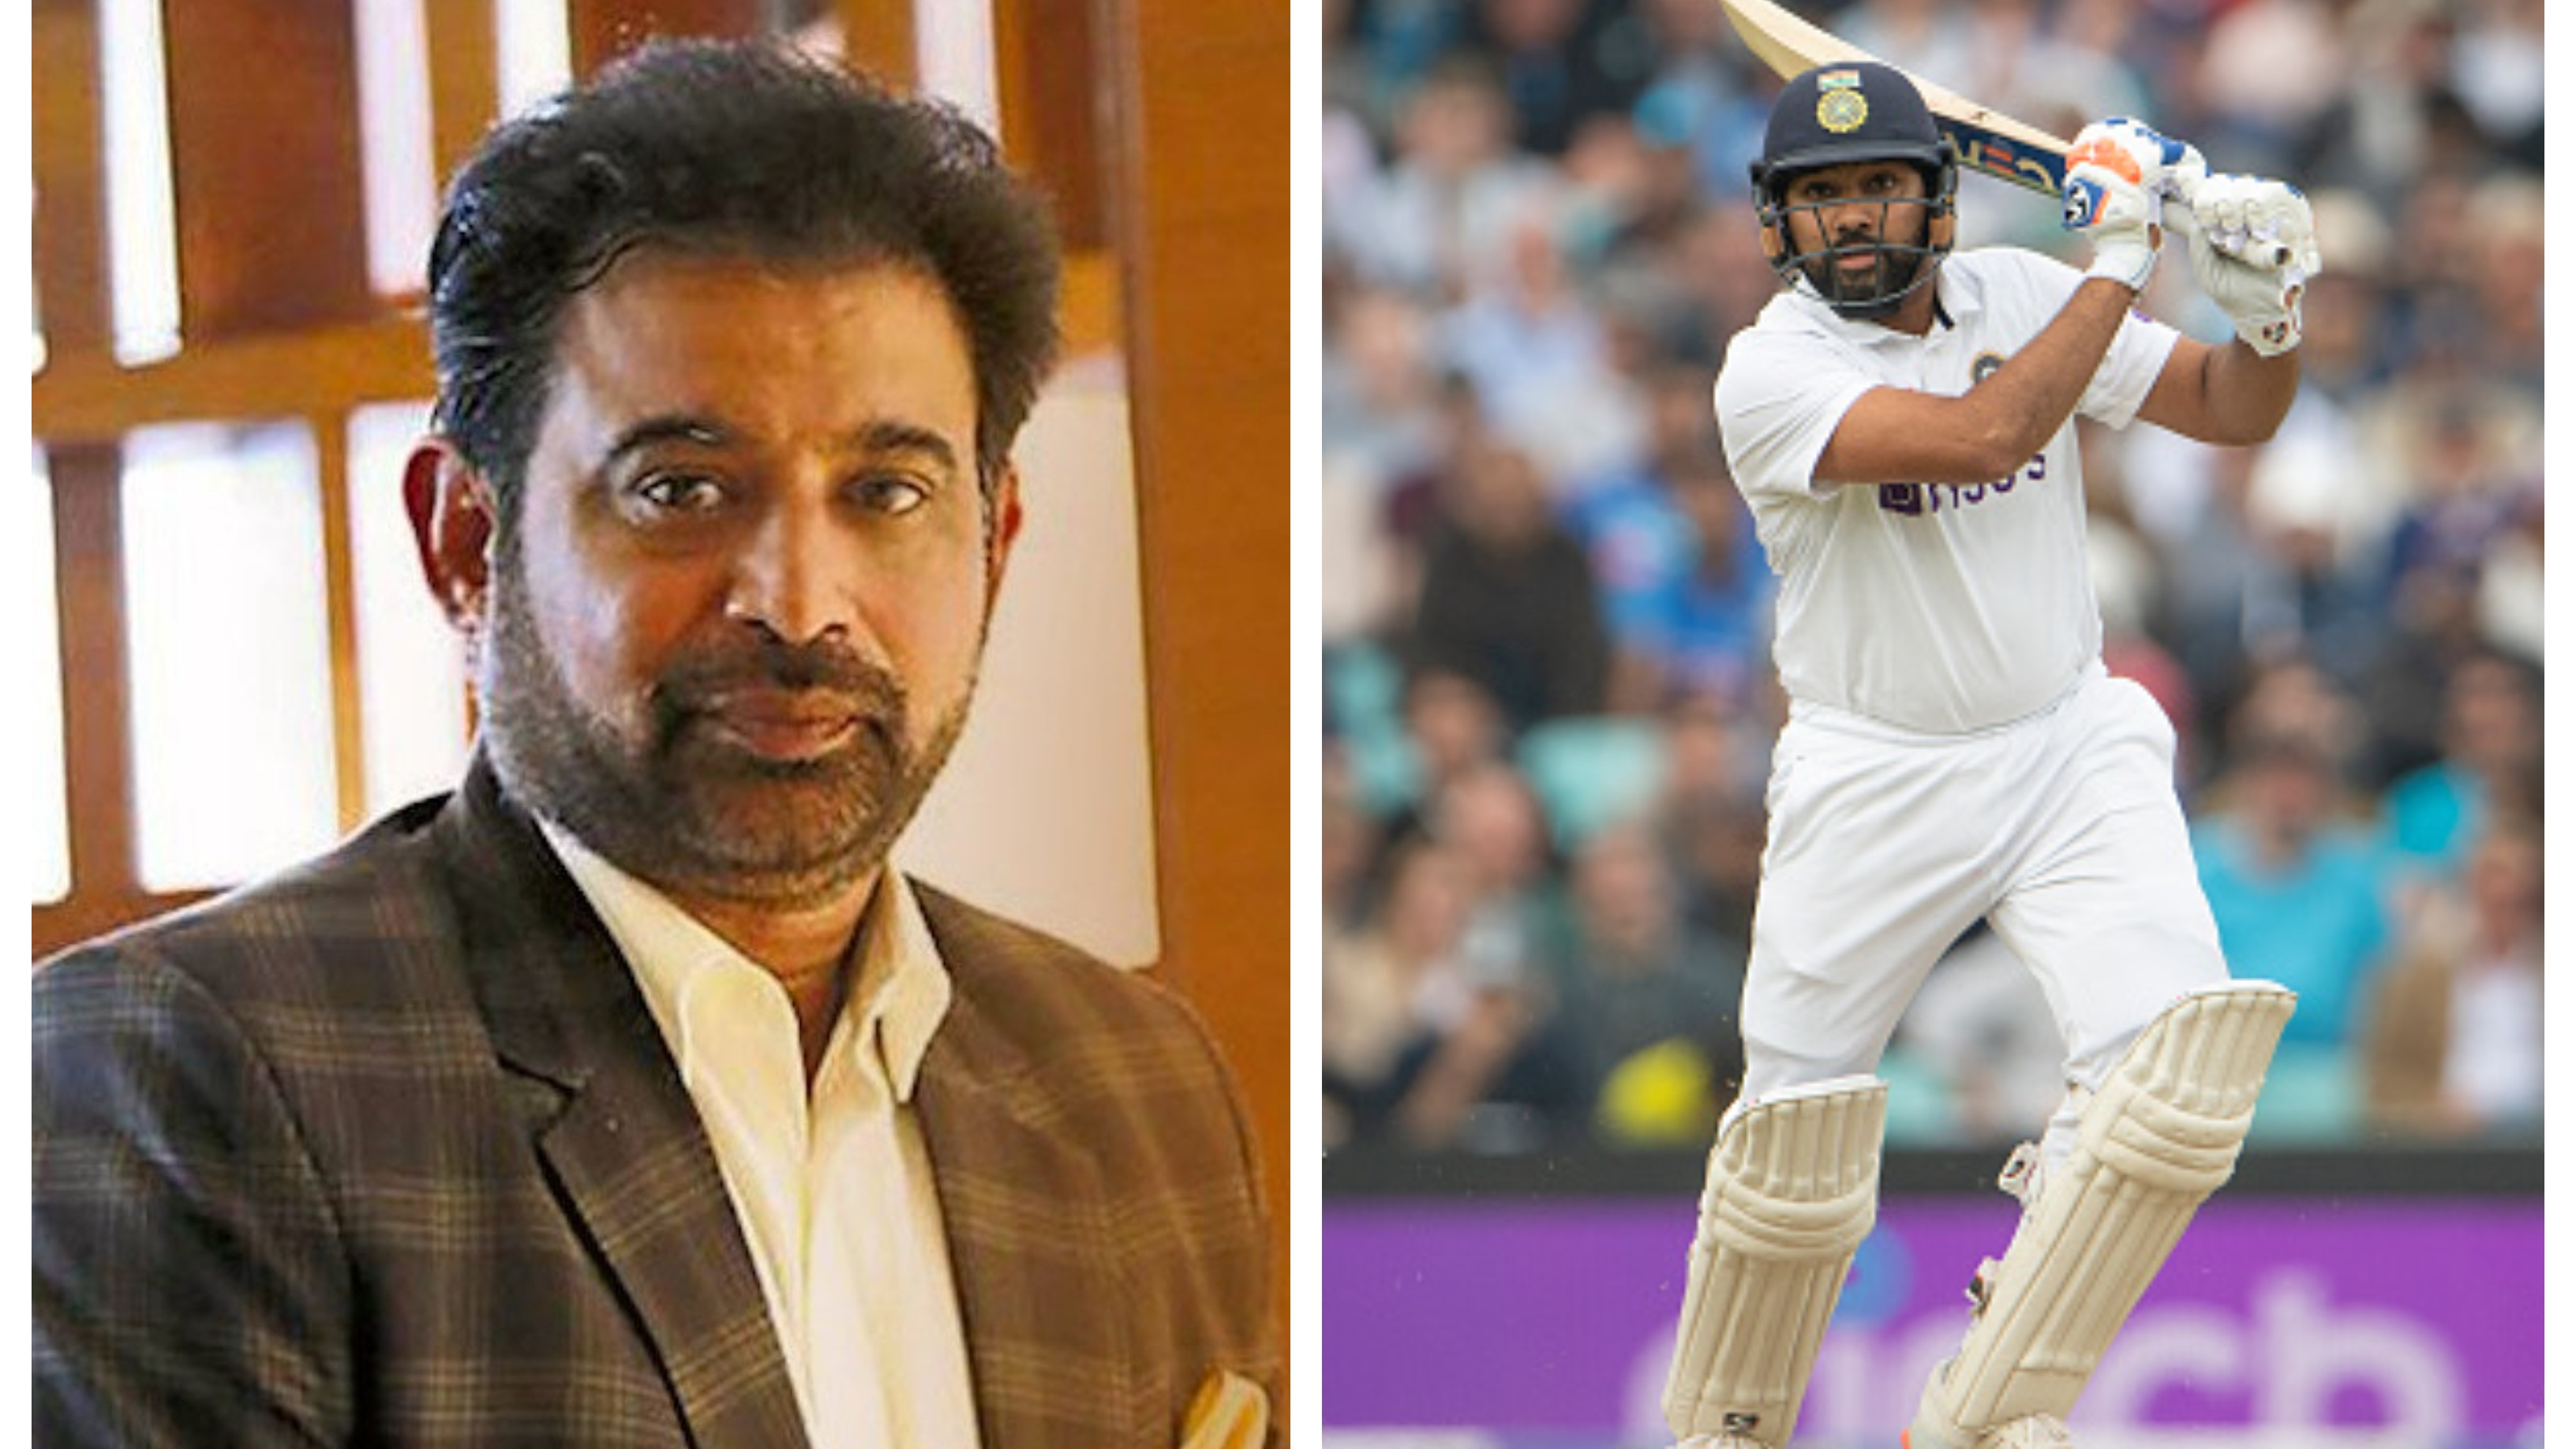 ‘He is the number one cricketer of our country’, India chief selector Chetan Sharma on Rohit Sharma